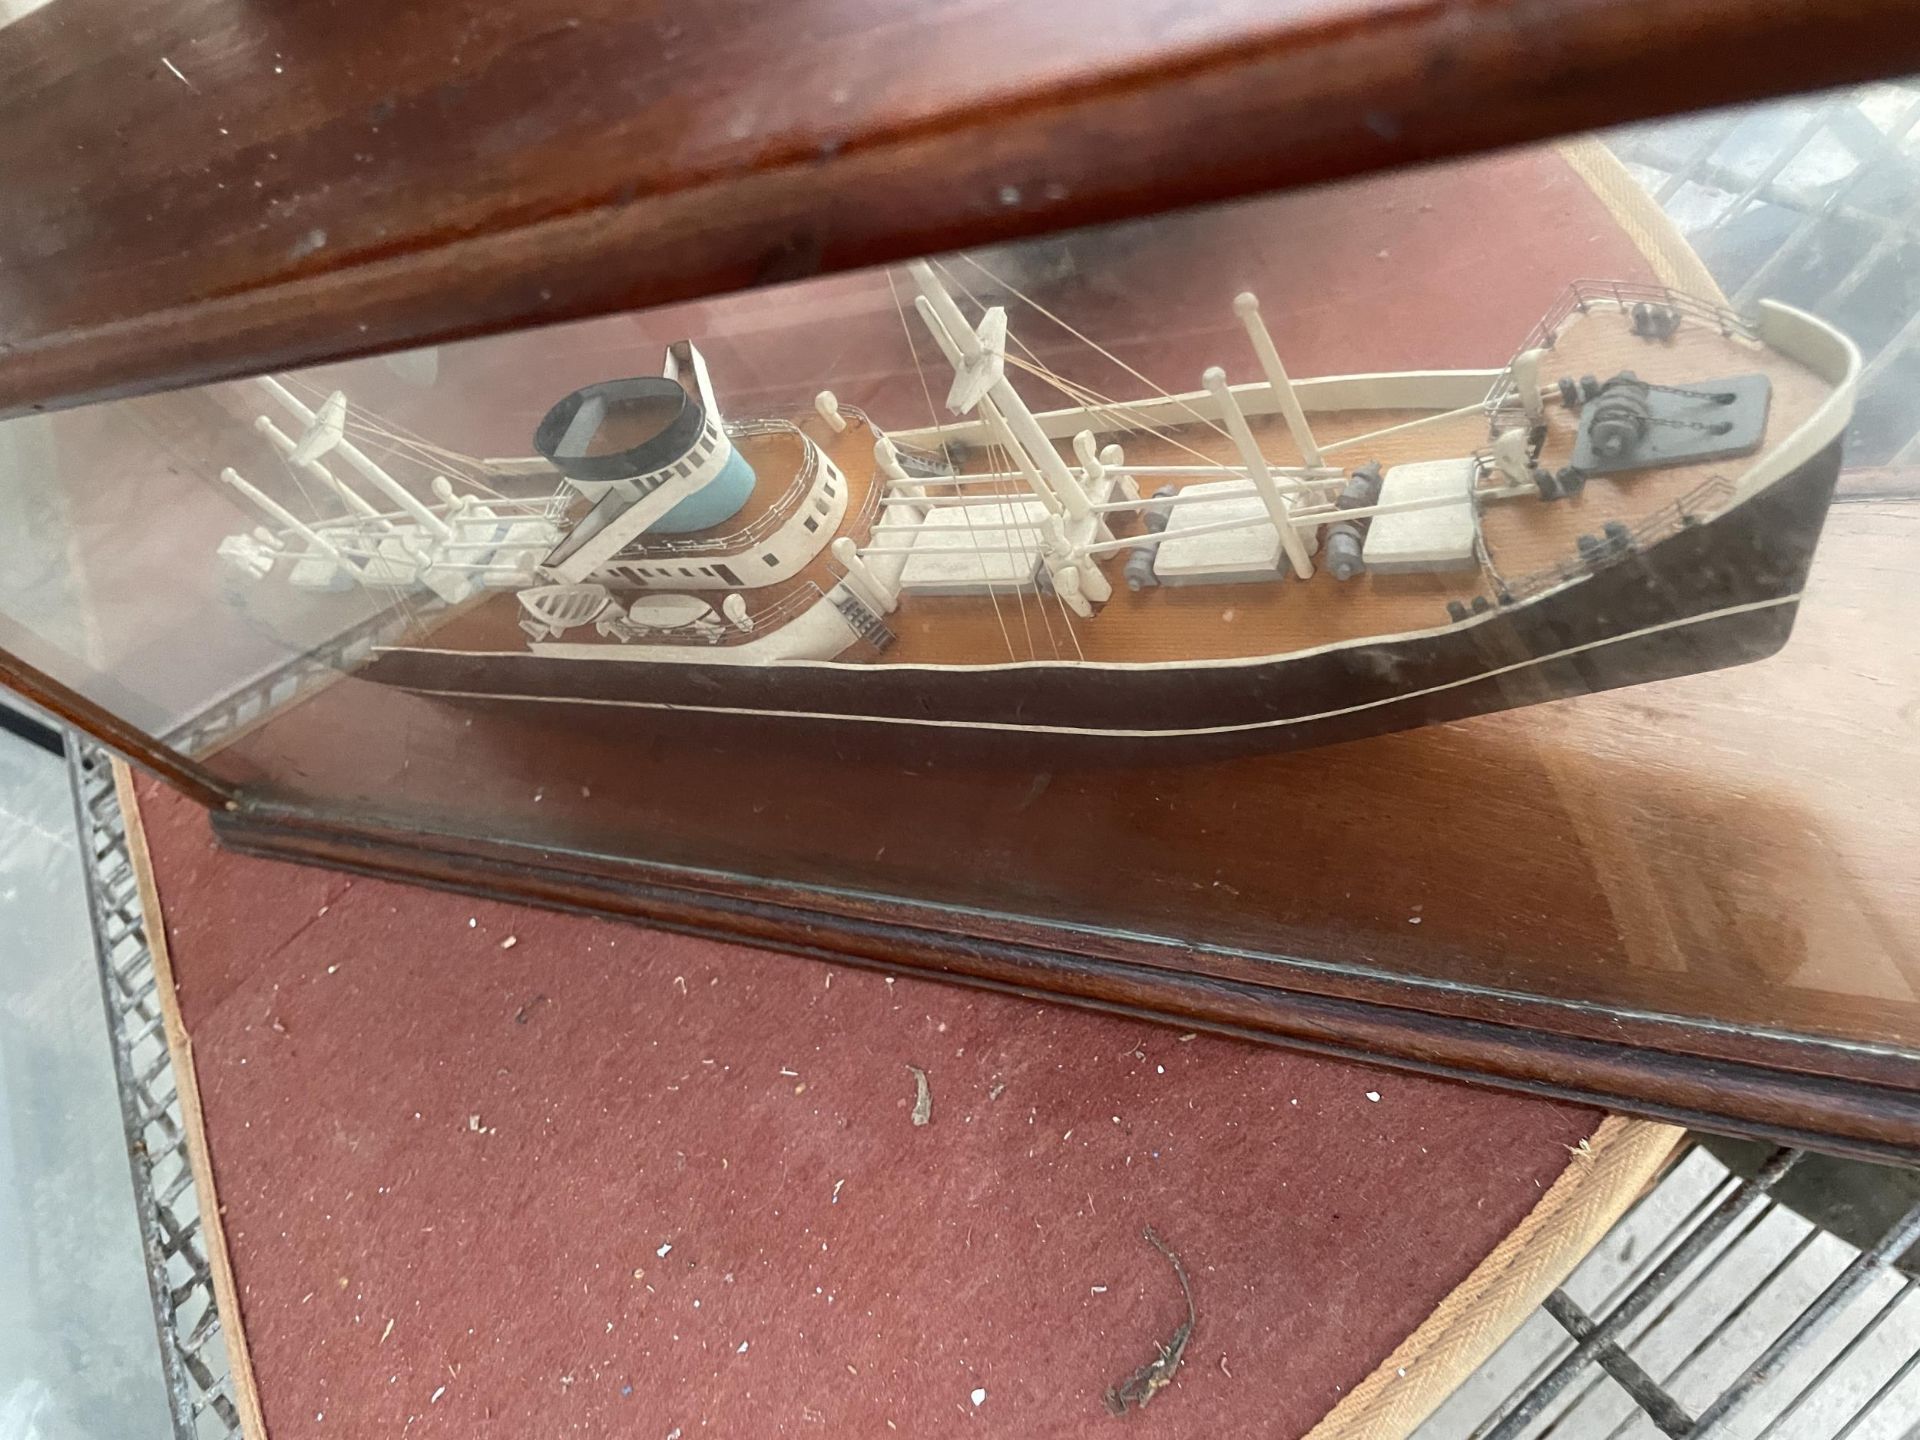 A MODEL OF A SHIP IN A GLASS DISPLAY CABINET - Image 3 of 6